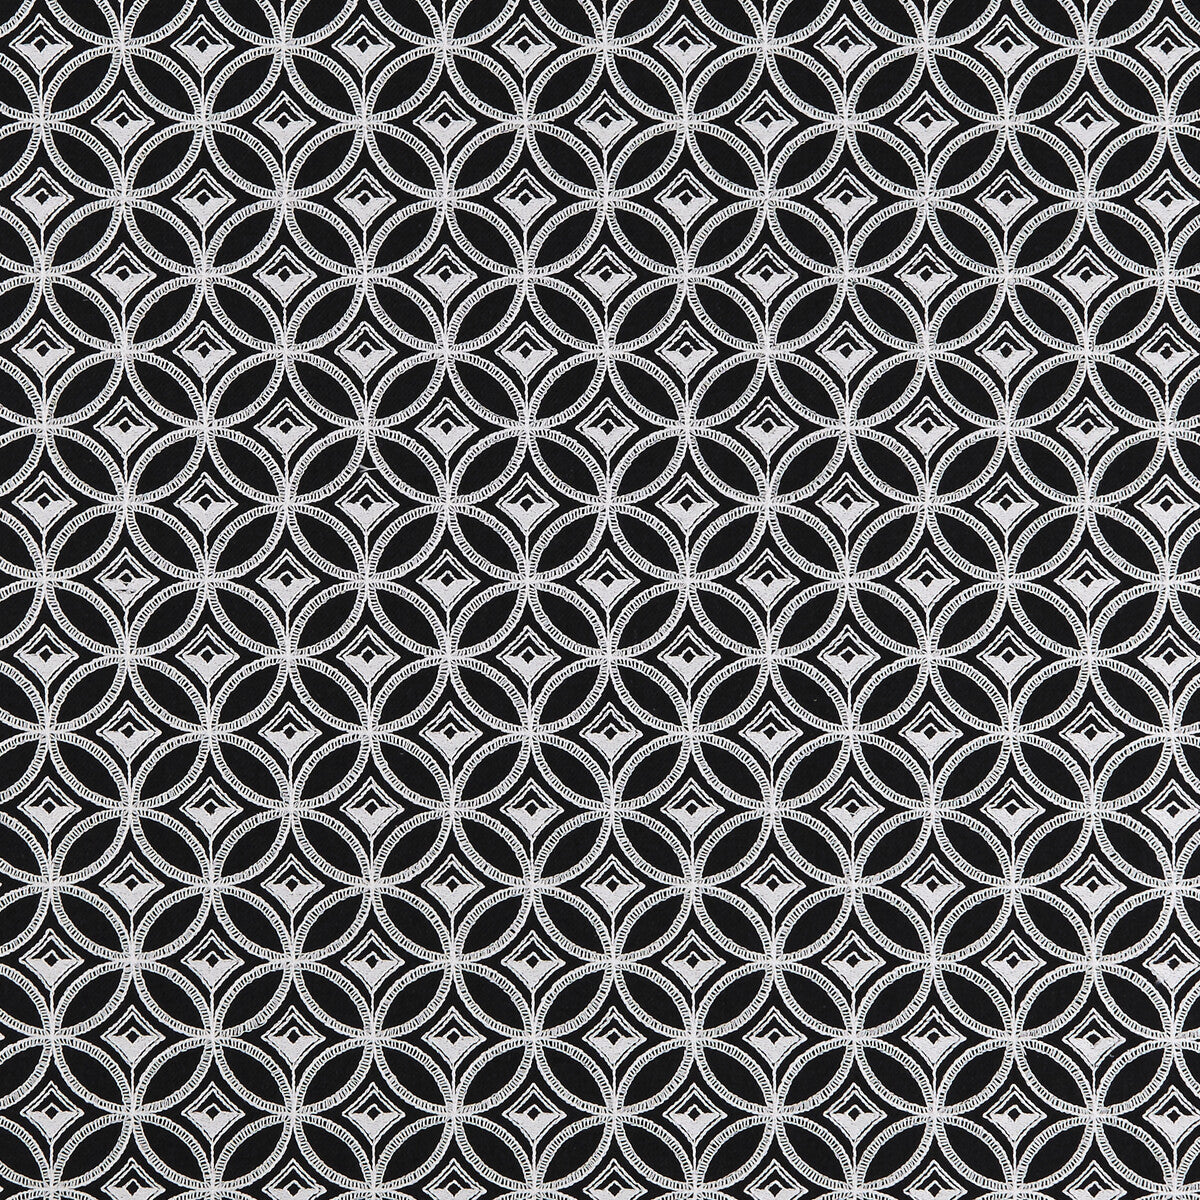 Bw1009 fabric in black/white color - pattern F0881/01.CAC.0 - by Clarke And Clarke in the Clarke &amp; Clarke Black + White collection